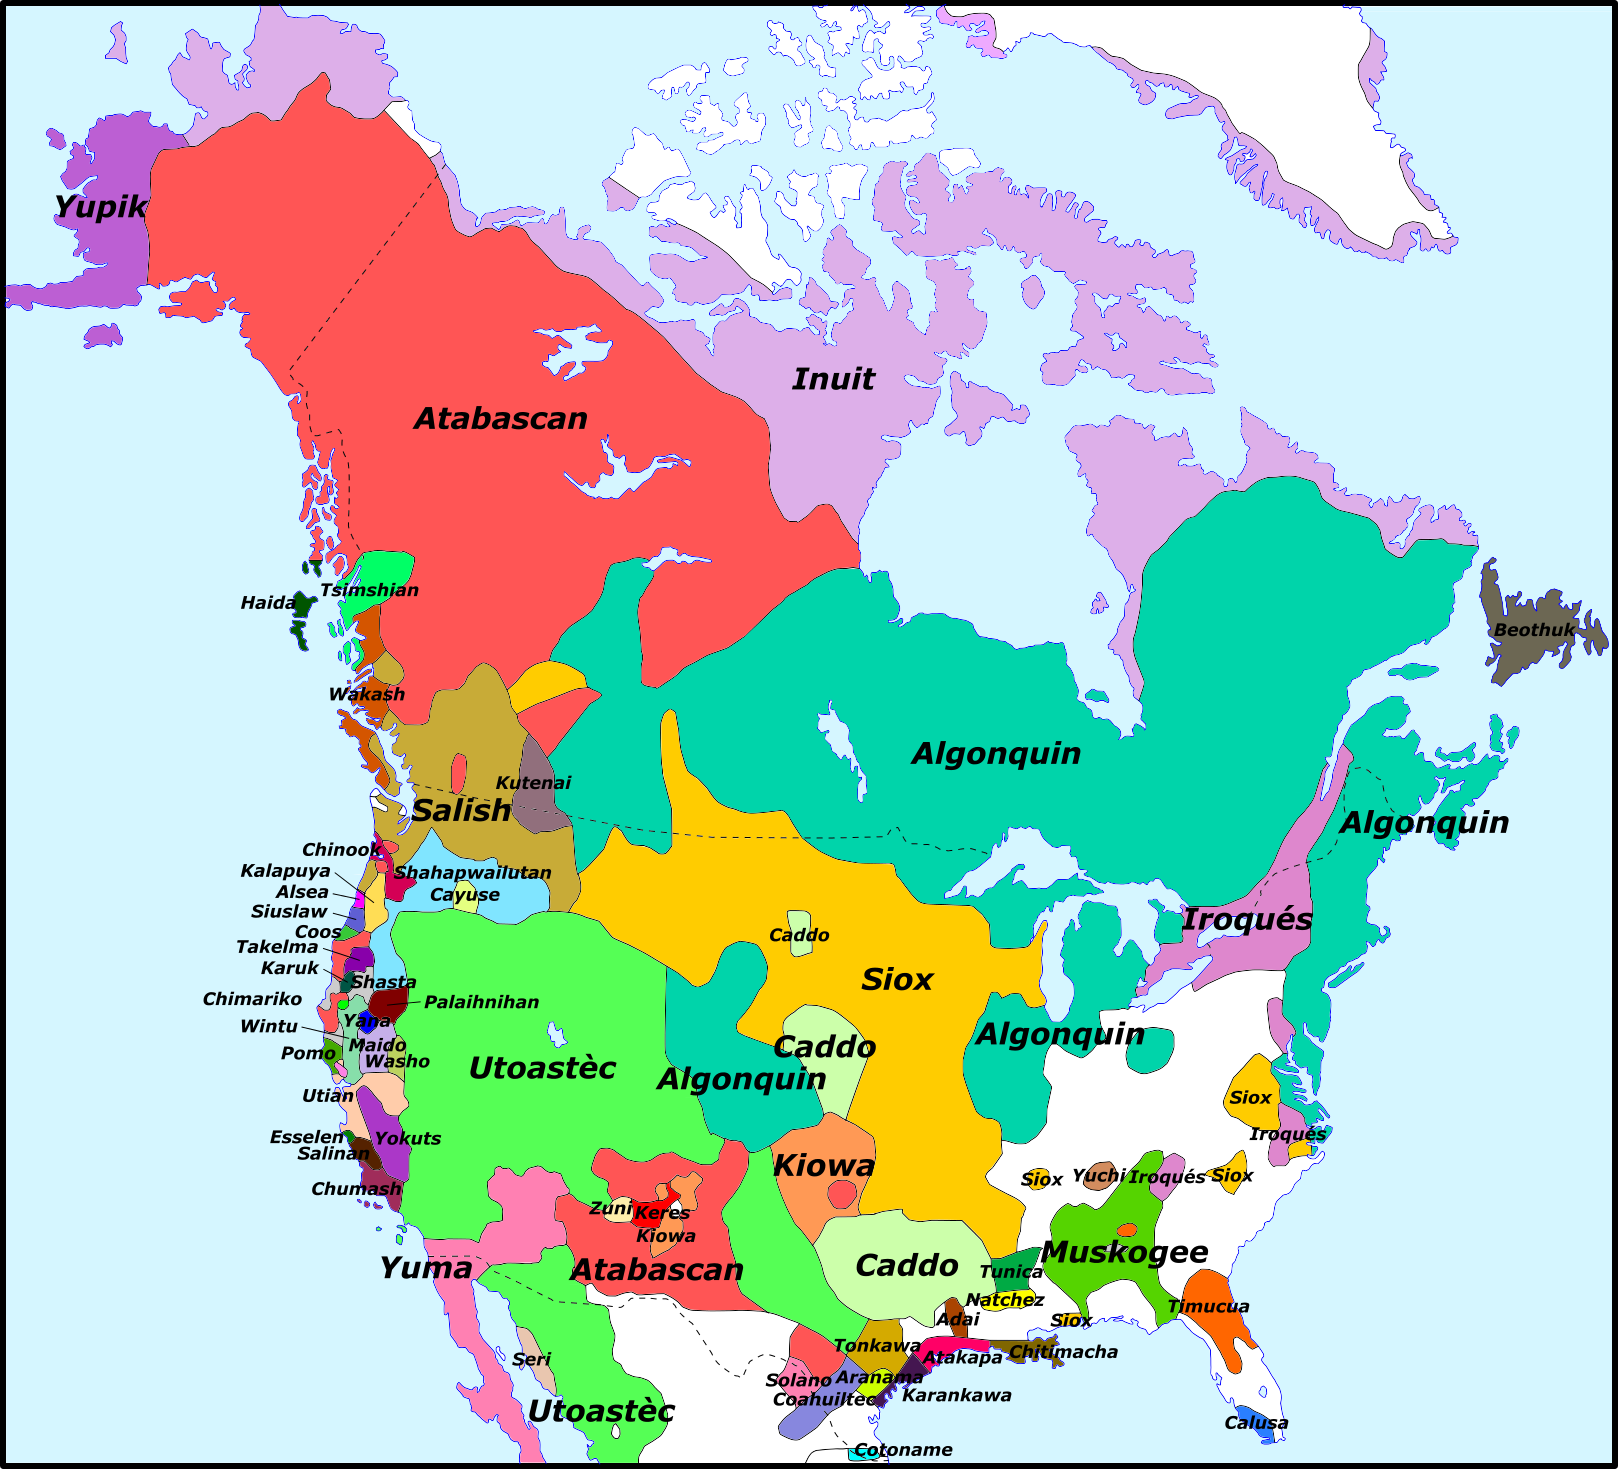 A coloured, labeled map of the North American language families according to the region in which they are spoken.